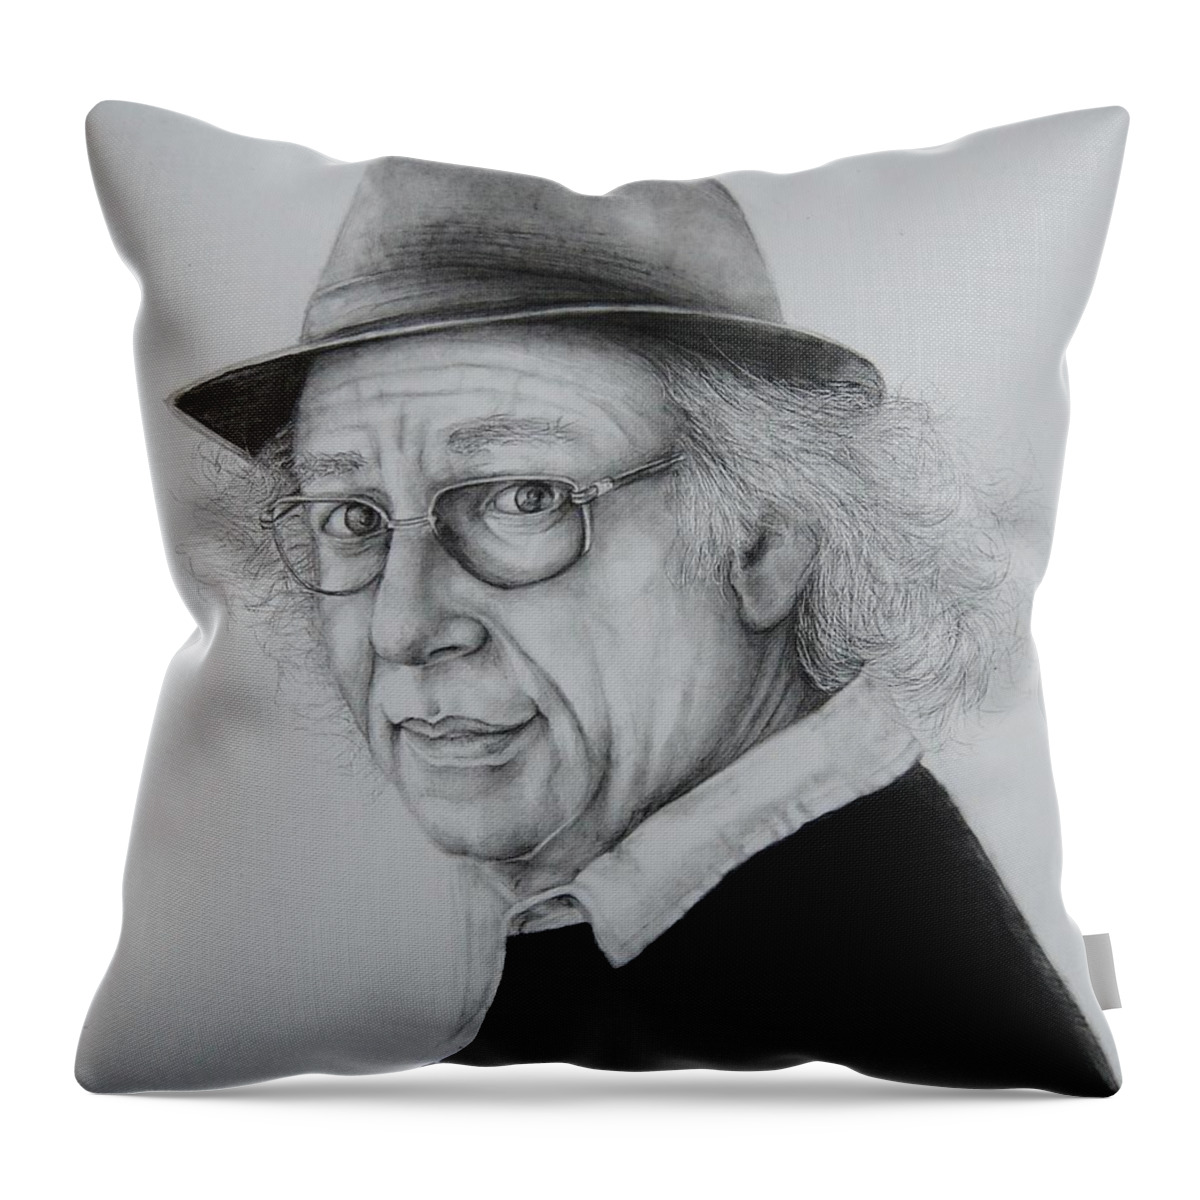 Man Throw Pillow featuring the drawing Just A Bit Quirky by Jean Cormier